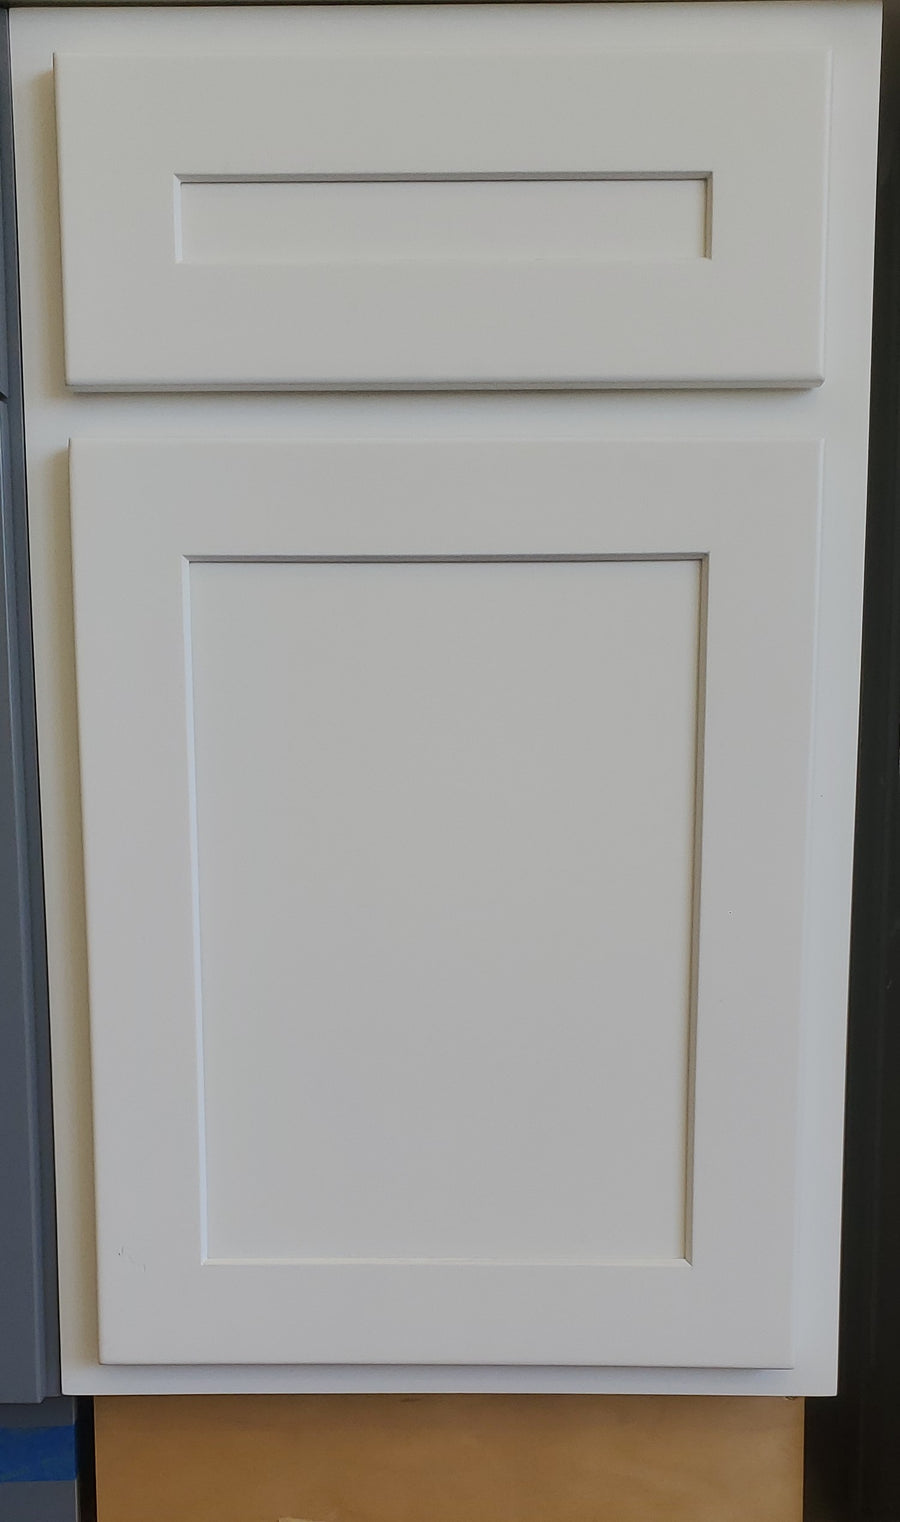 36" Wide by 12" Deep Bridge White Shaker 1/2" Overlay Wall Cabinet - Double Door 12", 15", 18", 21", 24" Tall - RTA Wholesalers